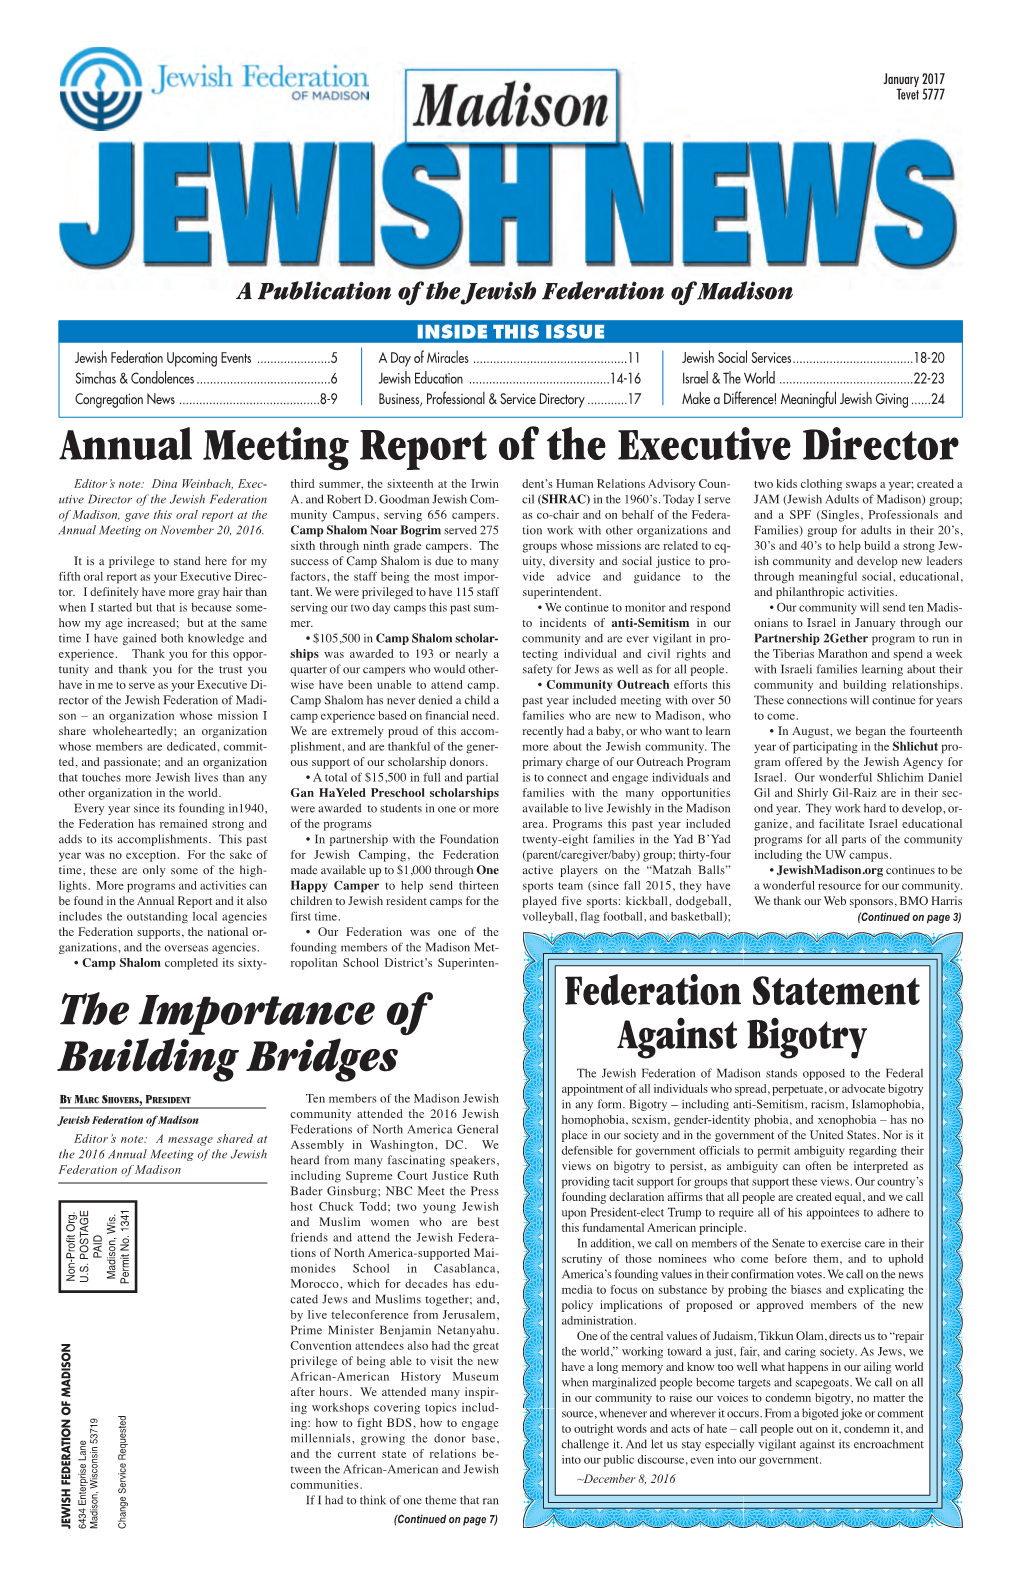 Annual Meeting Report of the Executive Director the Importance